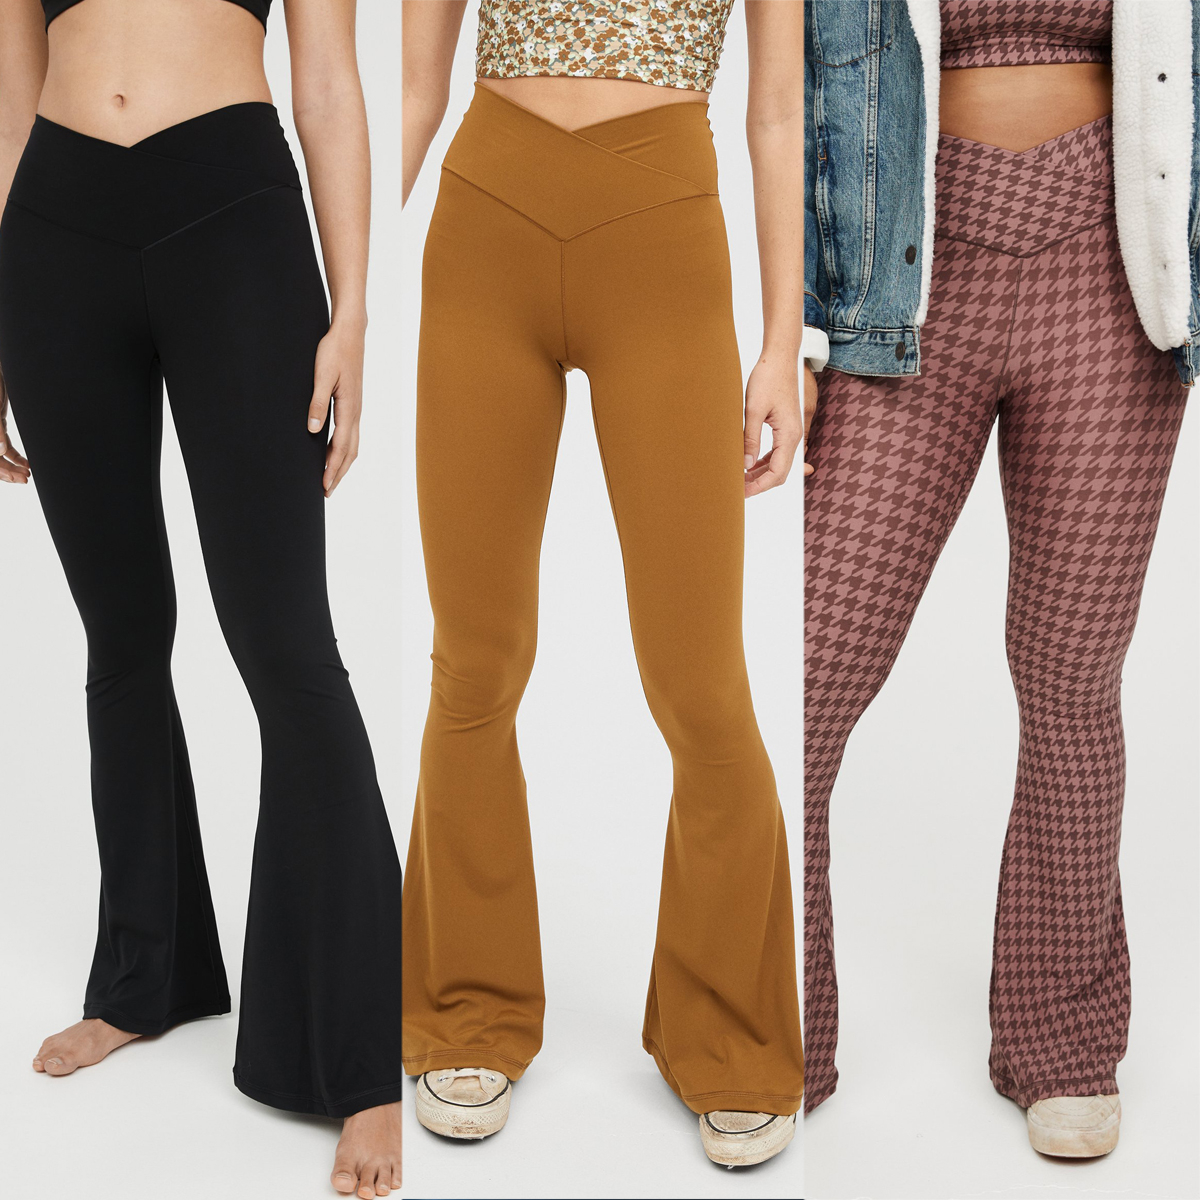 POP Fit®, POP Flare leggings are here! 😍 Add a little flair to your wear.  Our POP Flare leggings are flattering and versatile. Featuring our sig